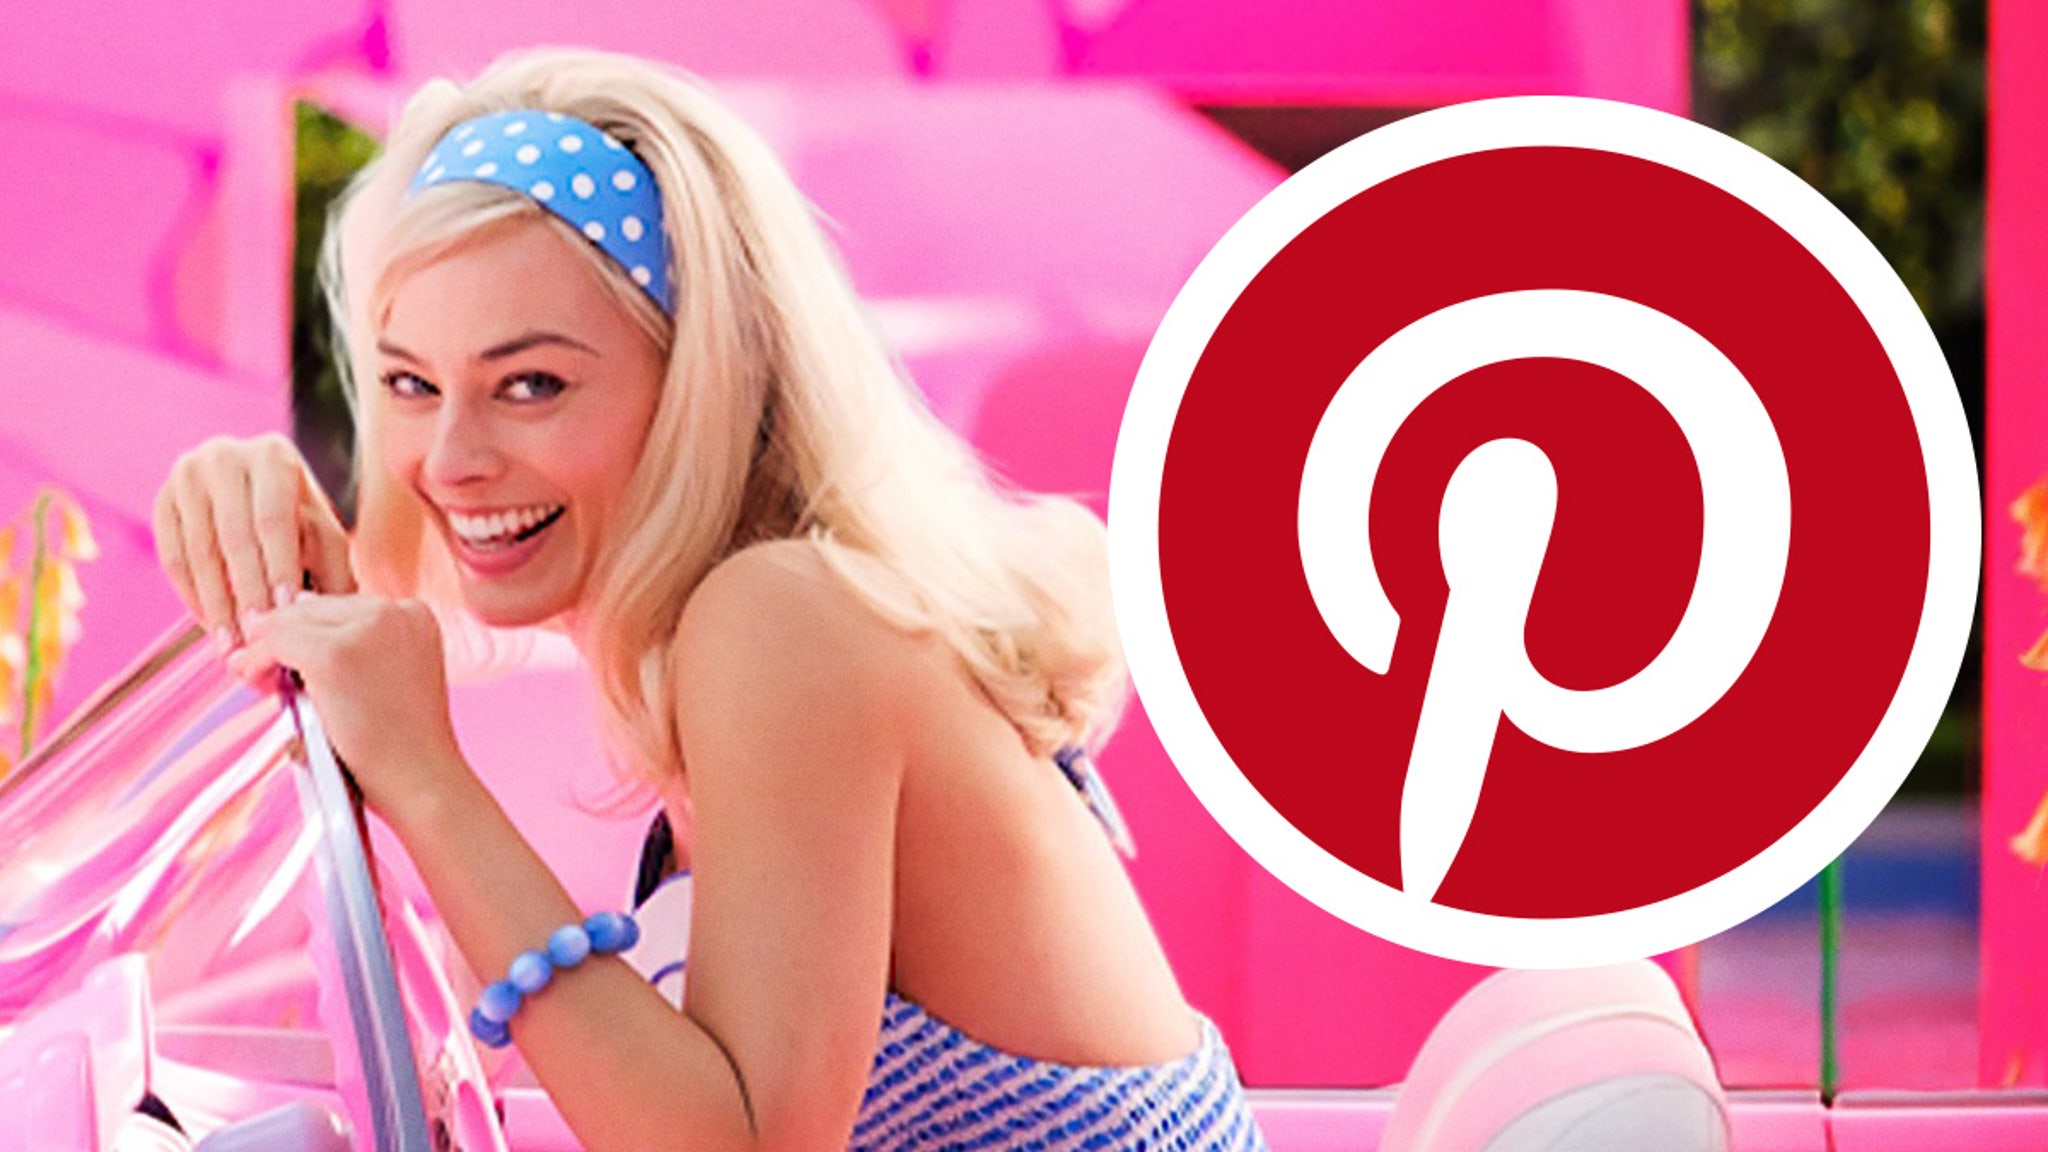 ‘Barbie’ Search Numbers Explode On Pinterest Ahead Of Movie Release